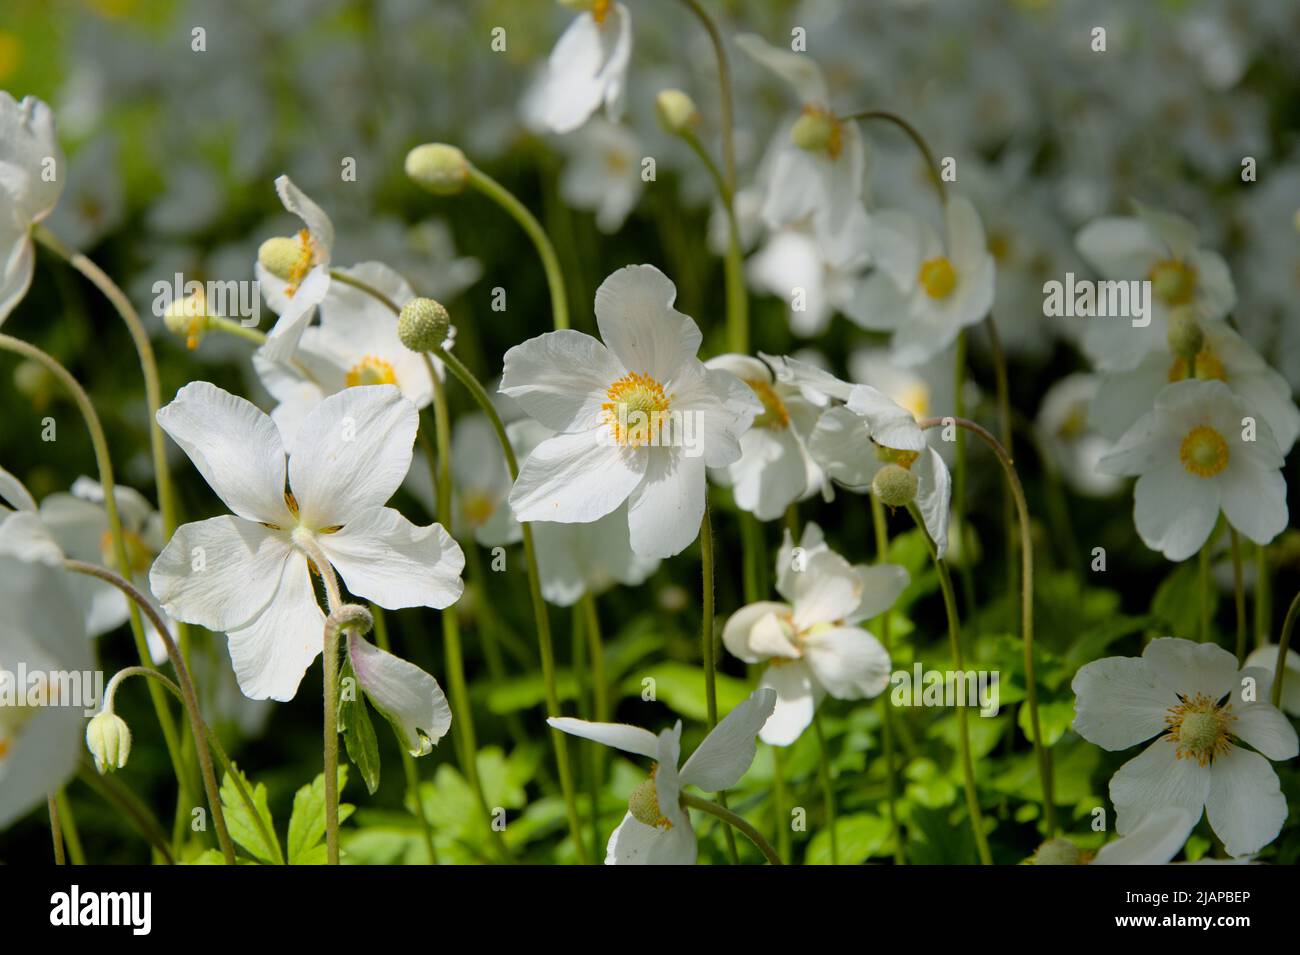 Beautiful white flowers of a snowdrop anemone in bloom in spring time in Ottawa, Ontario, Canada. Stock Photo